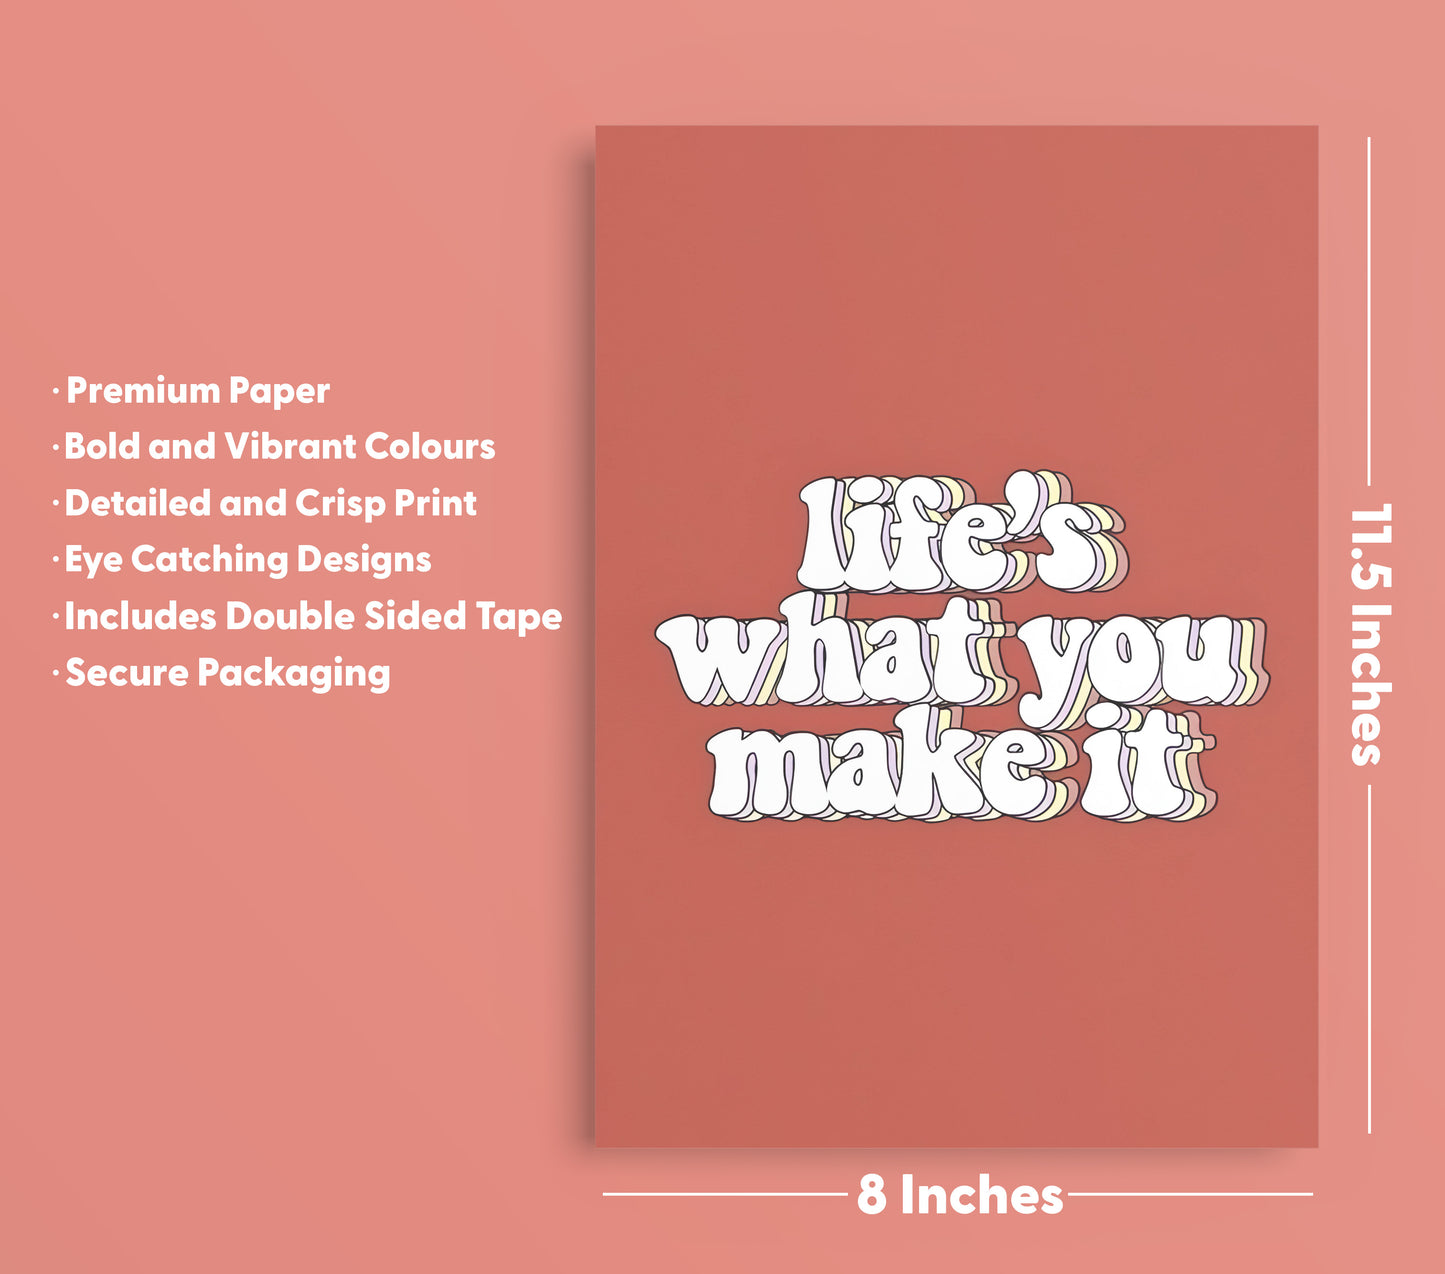 Life's What You Make It - Poster